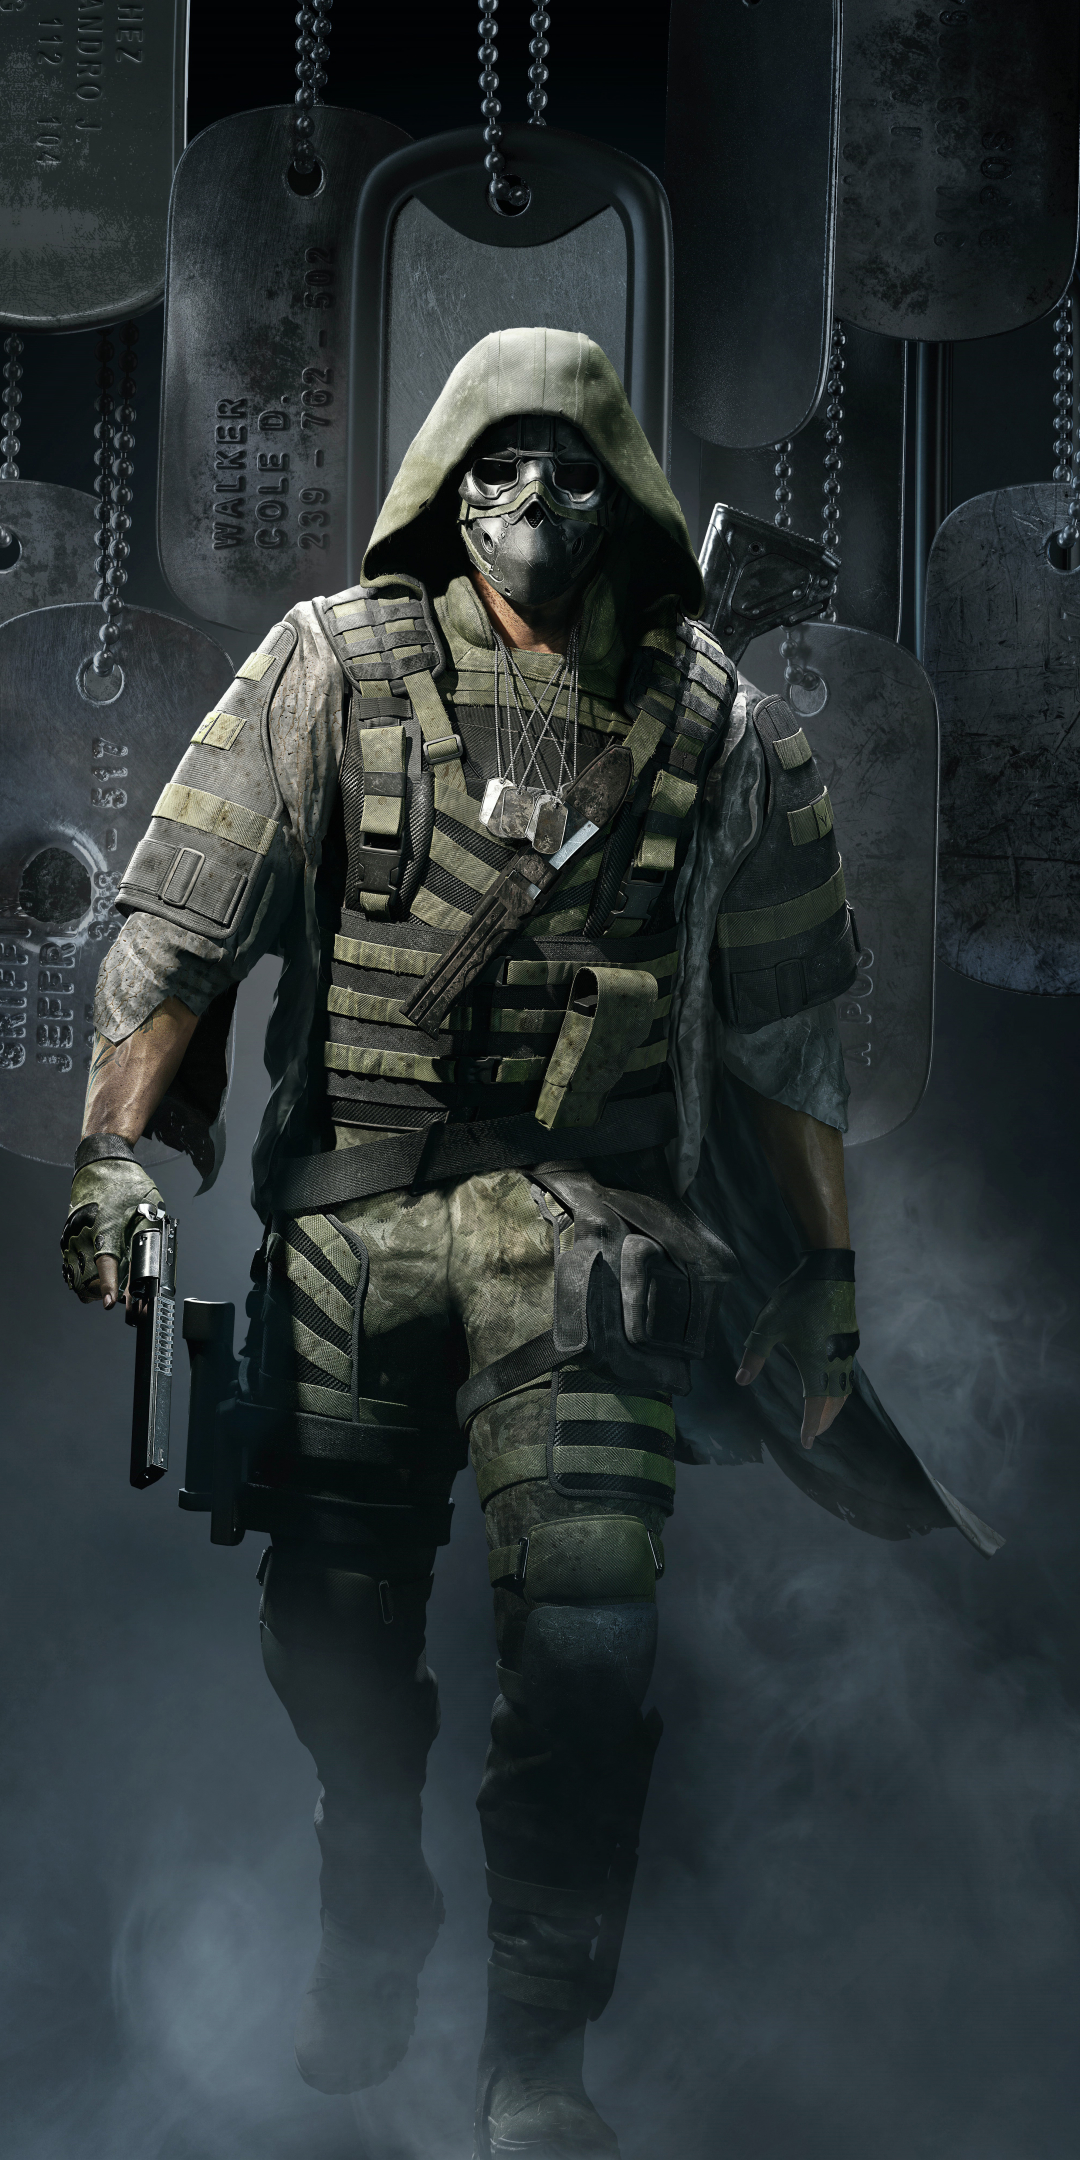 warrior, video game, tom clancy's ghost recon breakpoint, mask, pistol, gun, dog tag, tom clancy's